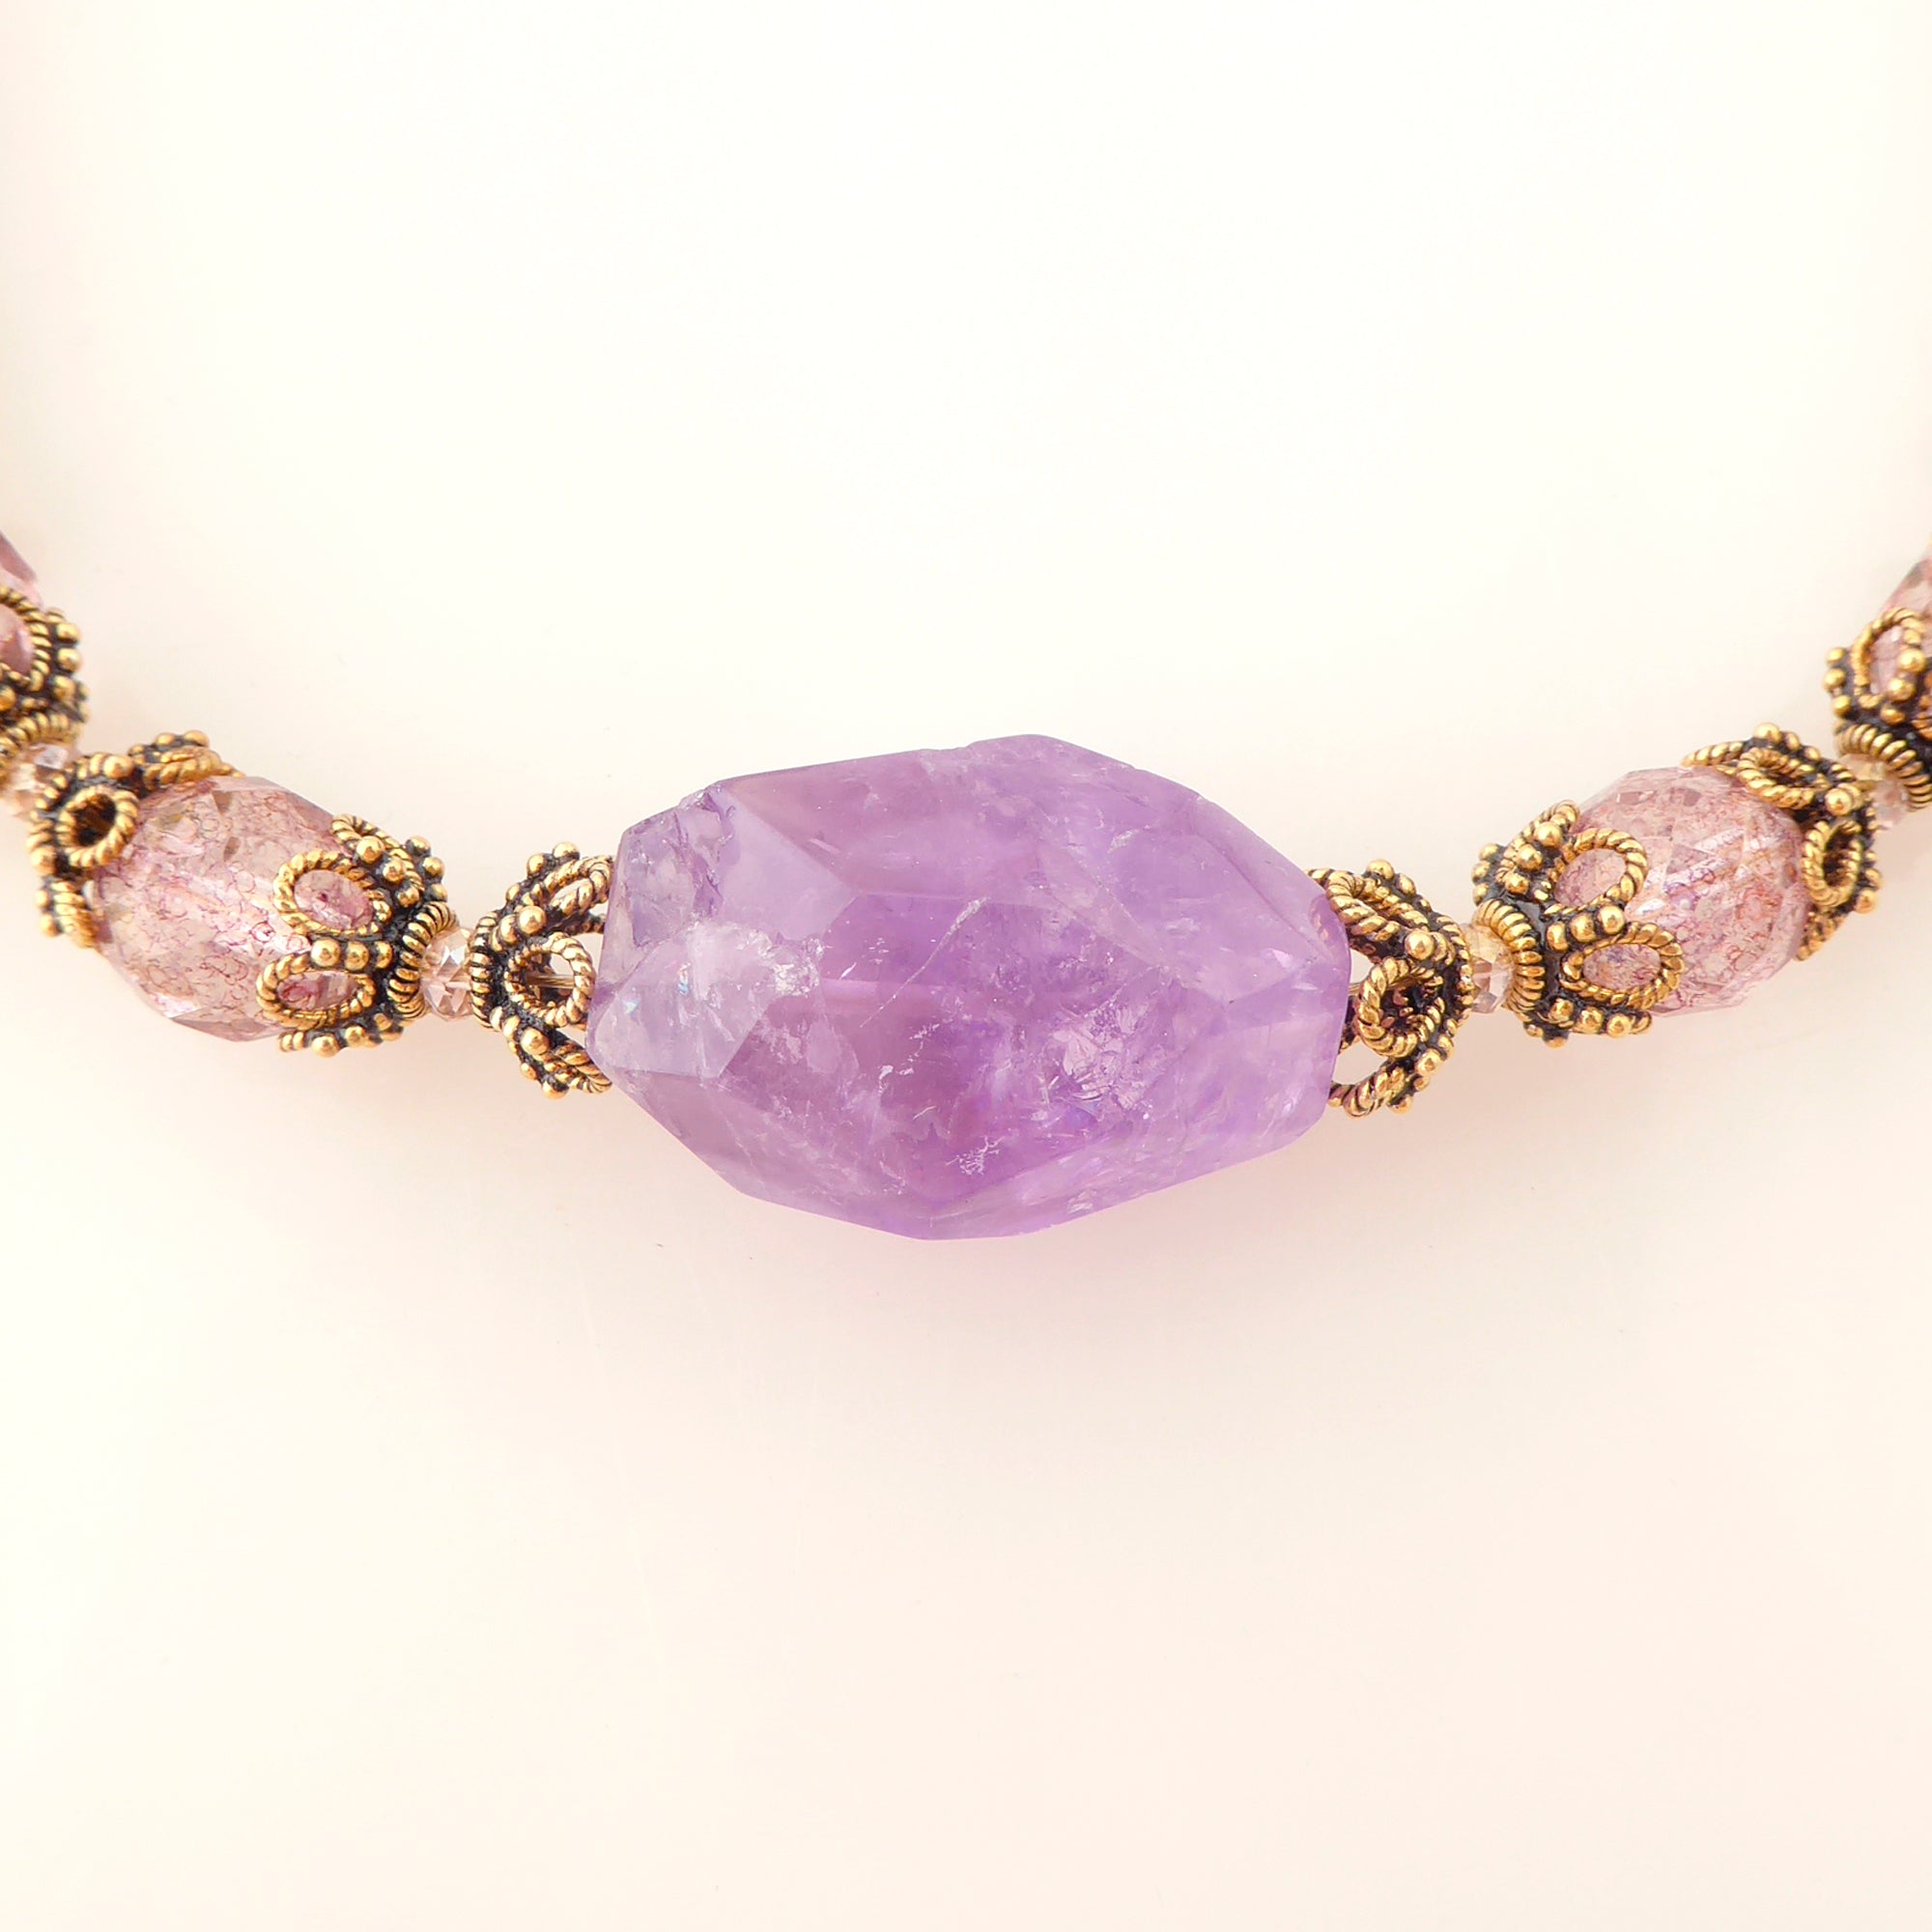 Amethyst rococo necklace by Jenny Dayco 4